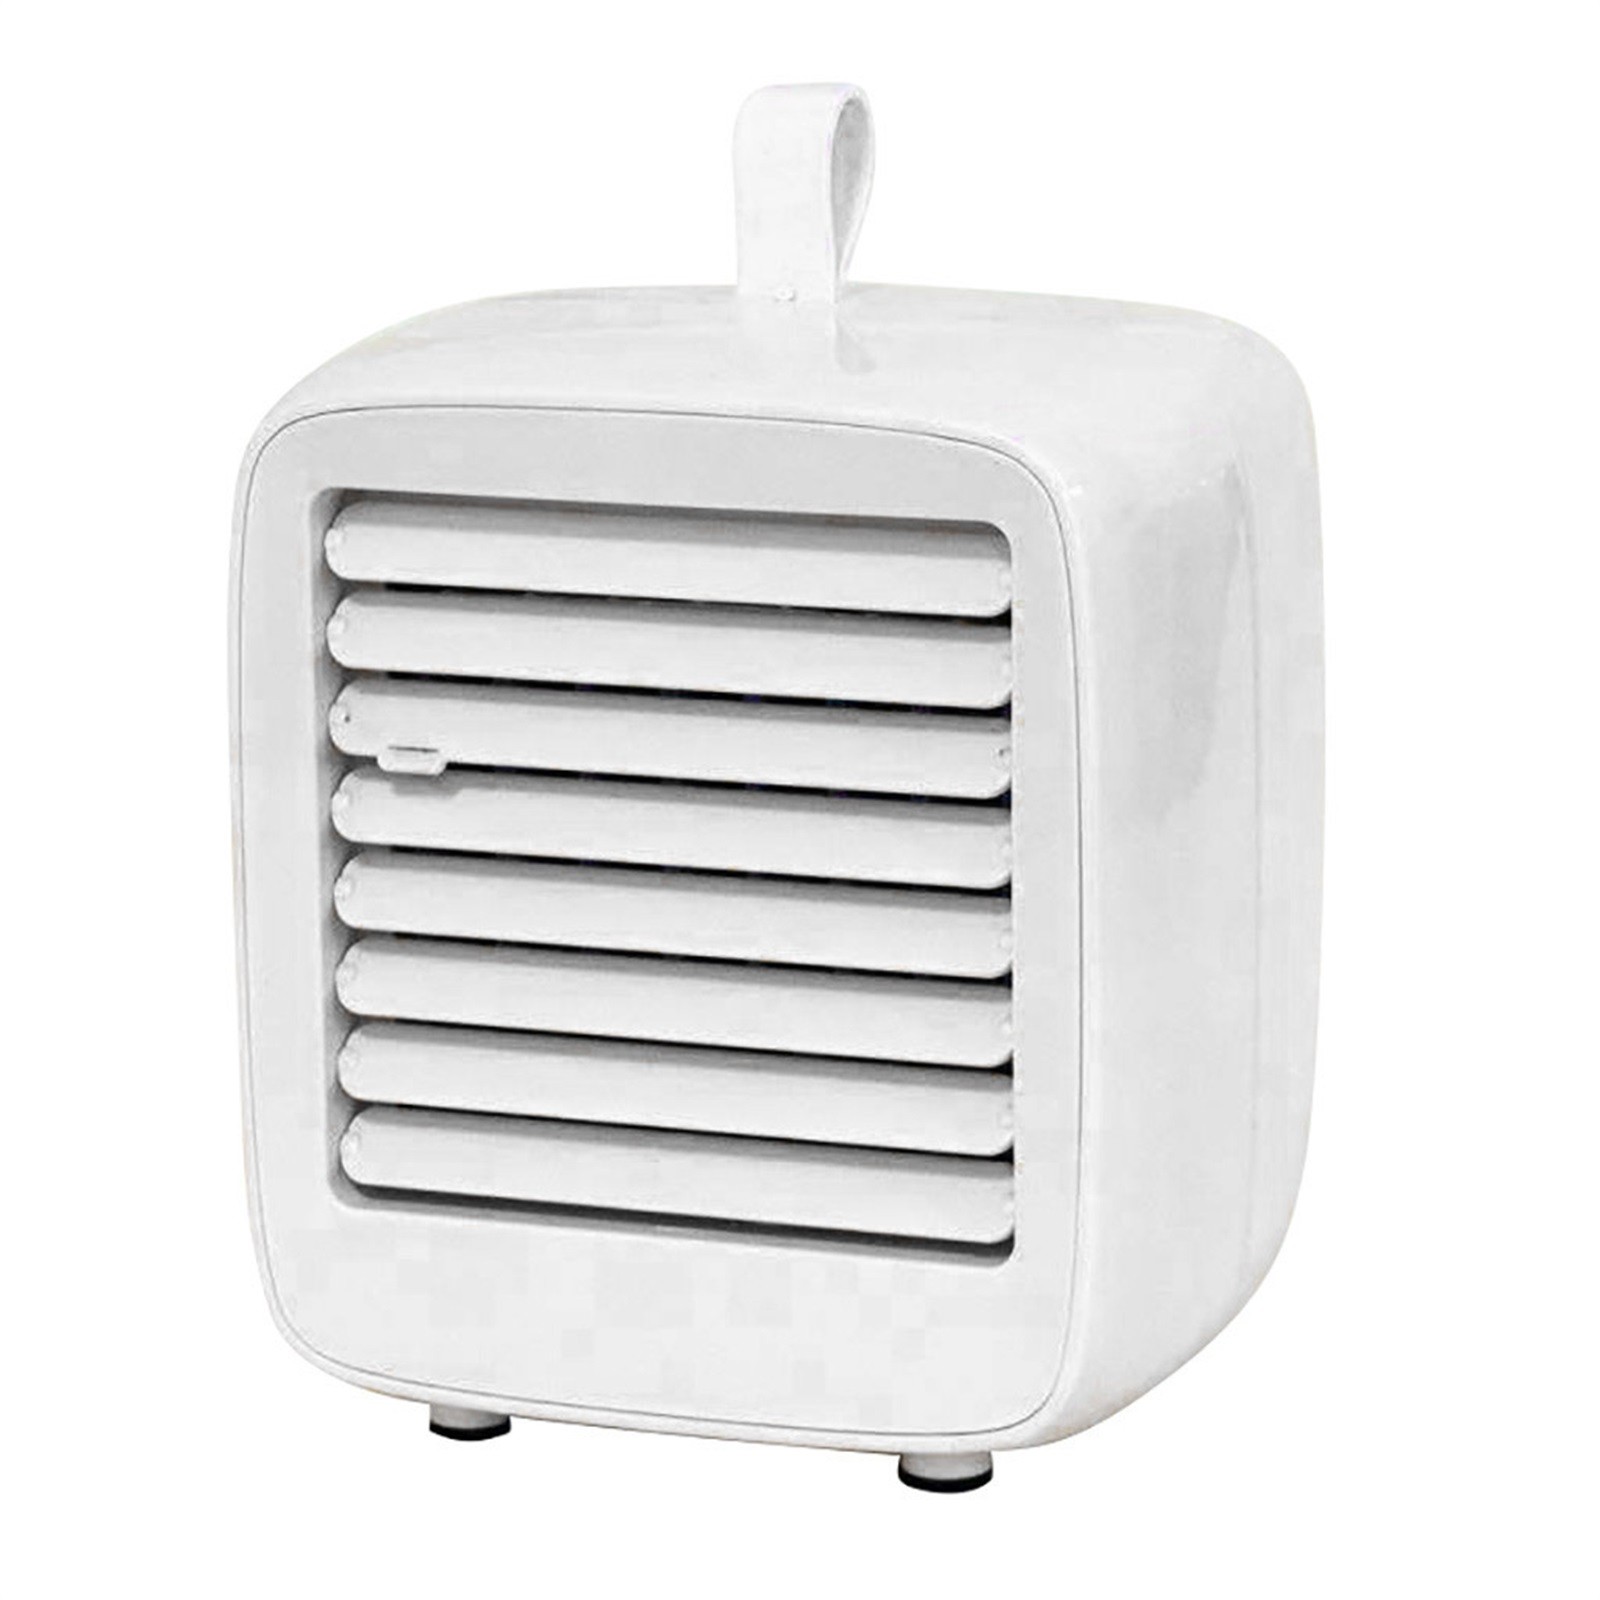 OAVQHLG37B Portable Air Conditioners USB Mini Air Cooler Portable Desktop Cooling Fan Student Dormitory Air Condition - image 4 of 5